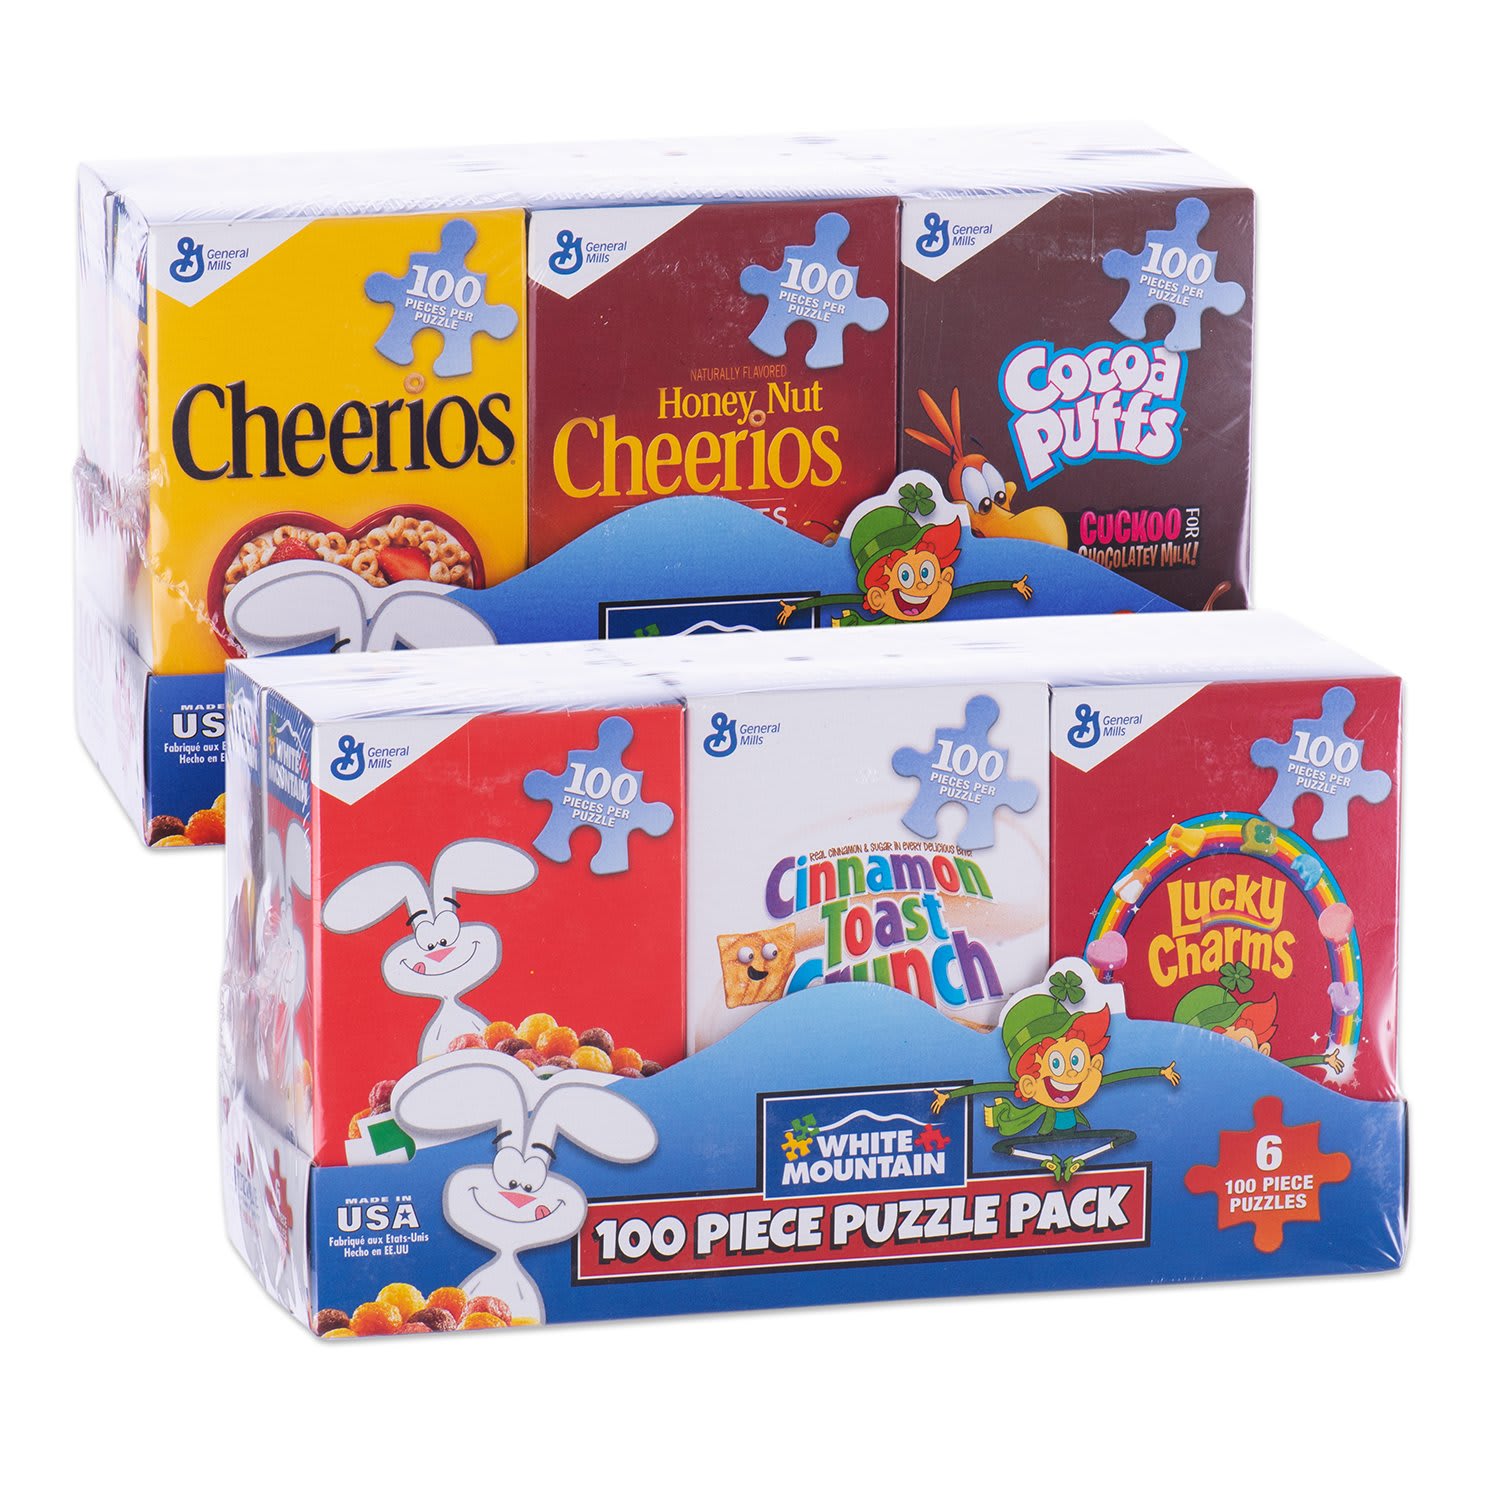 Give a Boost to your Business with Custom Cereal Boxes